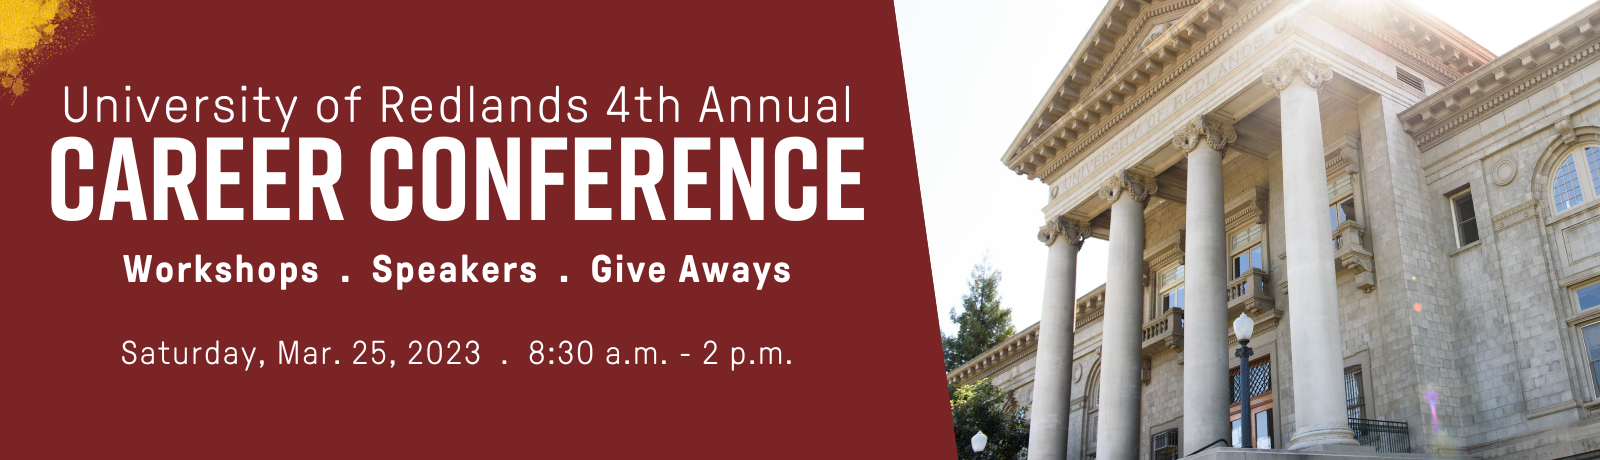 University of Redlands 4th Annual Career Conference. Workshops. Speakers. Give Aways. Saturday, March 25, 2023. 8:30 a.m. - 2 p.m.